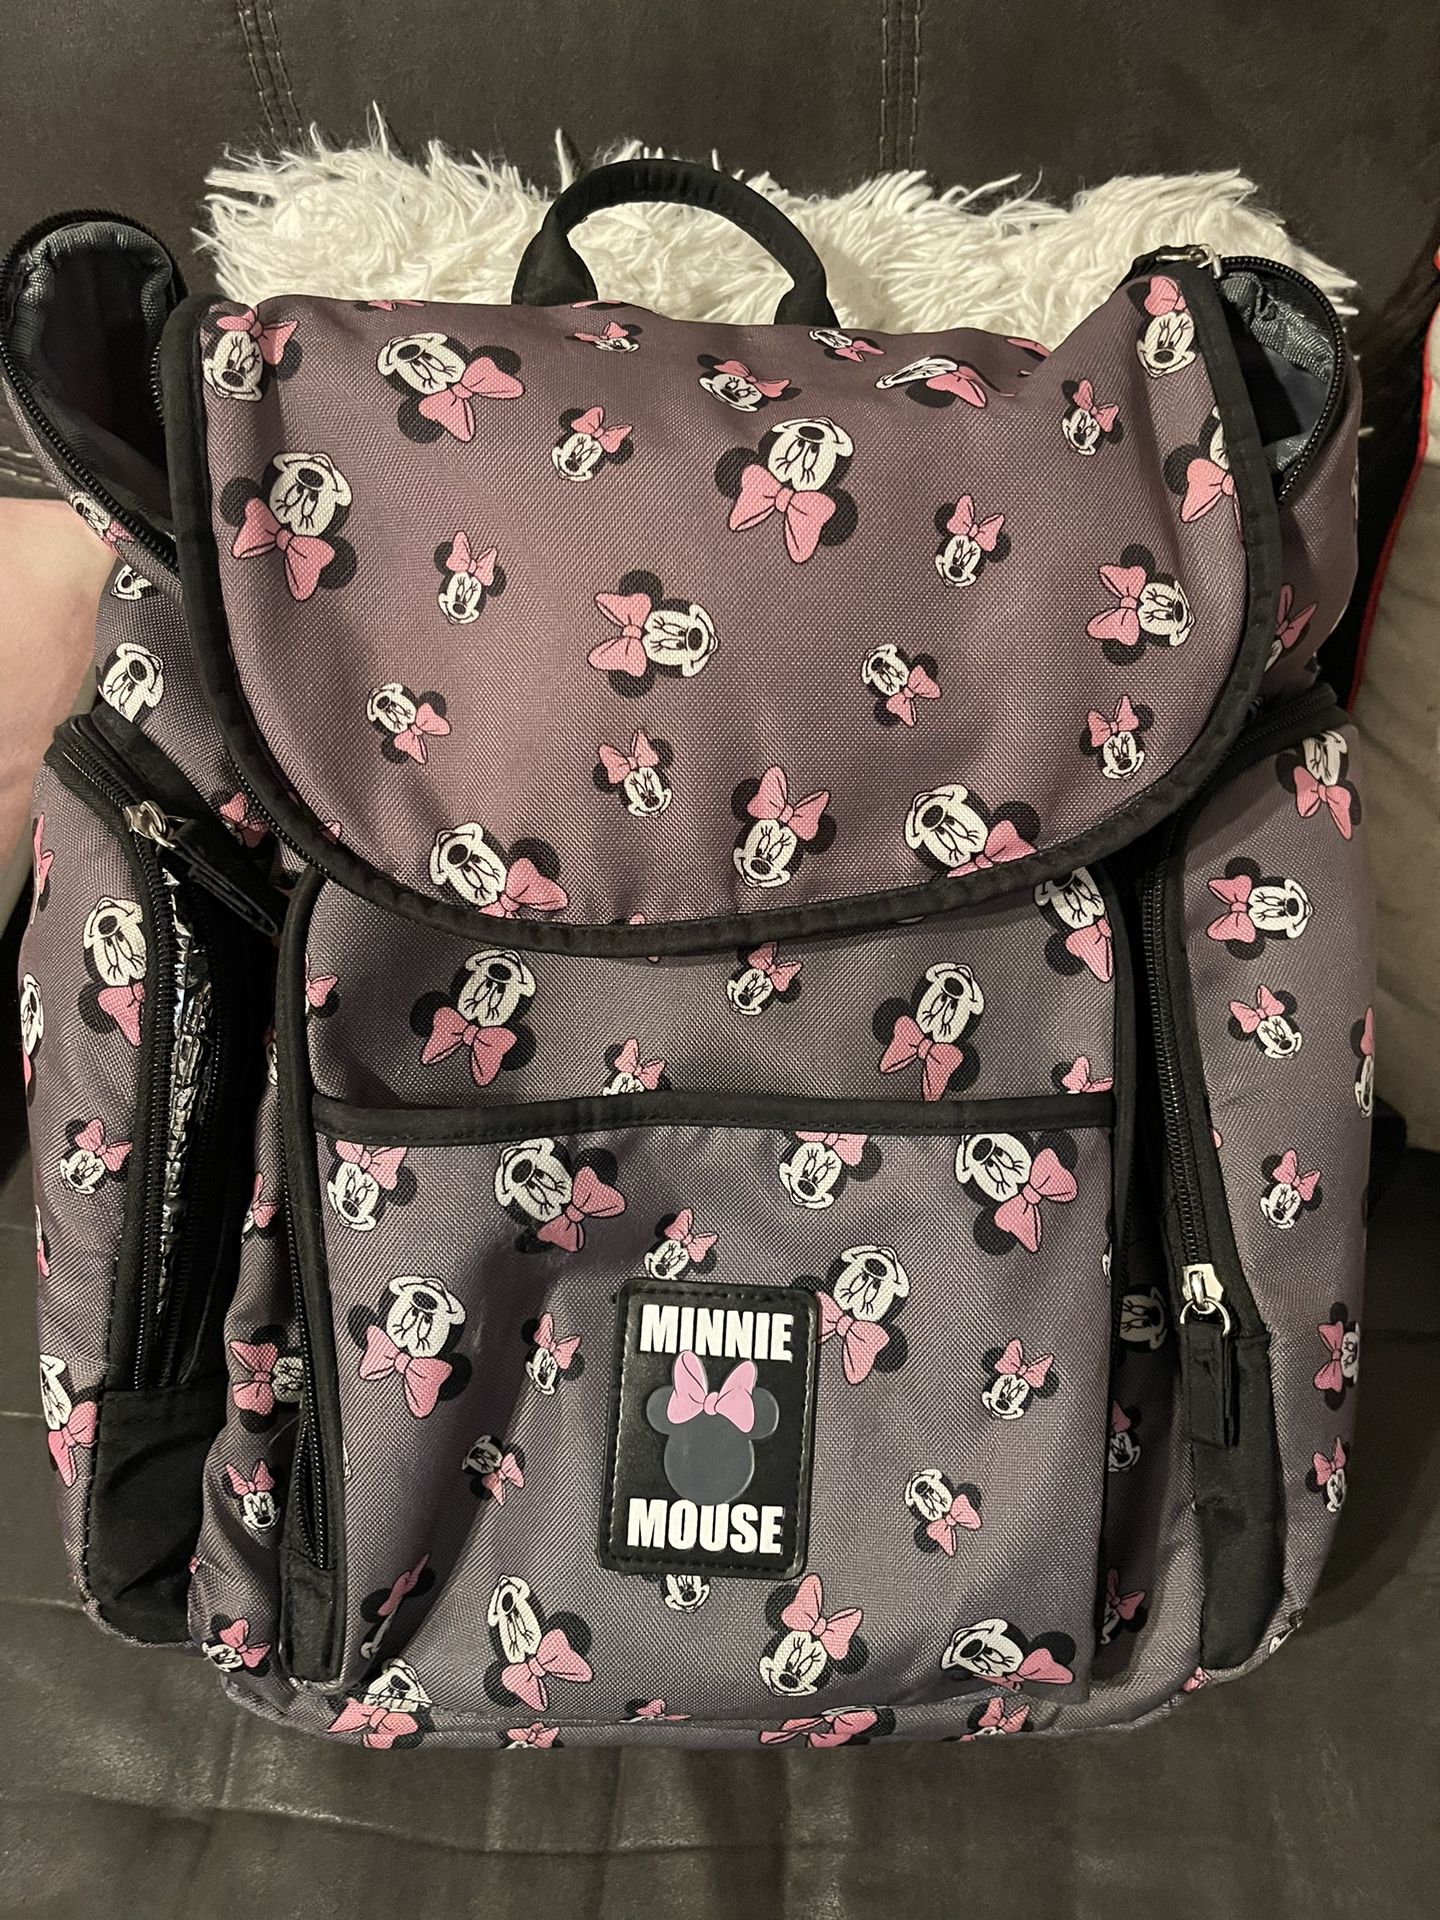 Minnie Mouse Baby Girl Diaper Bag